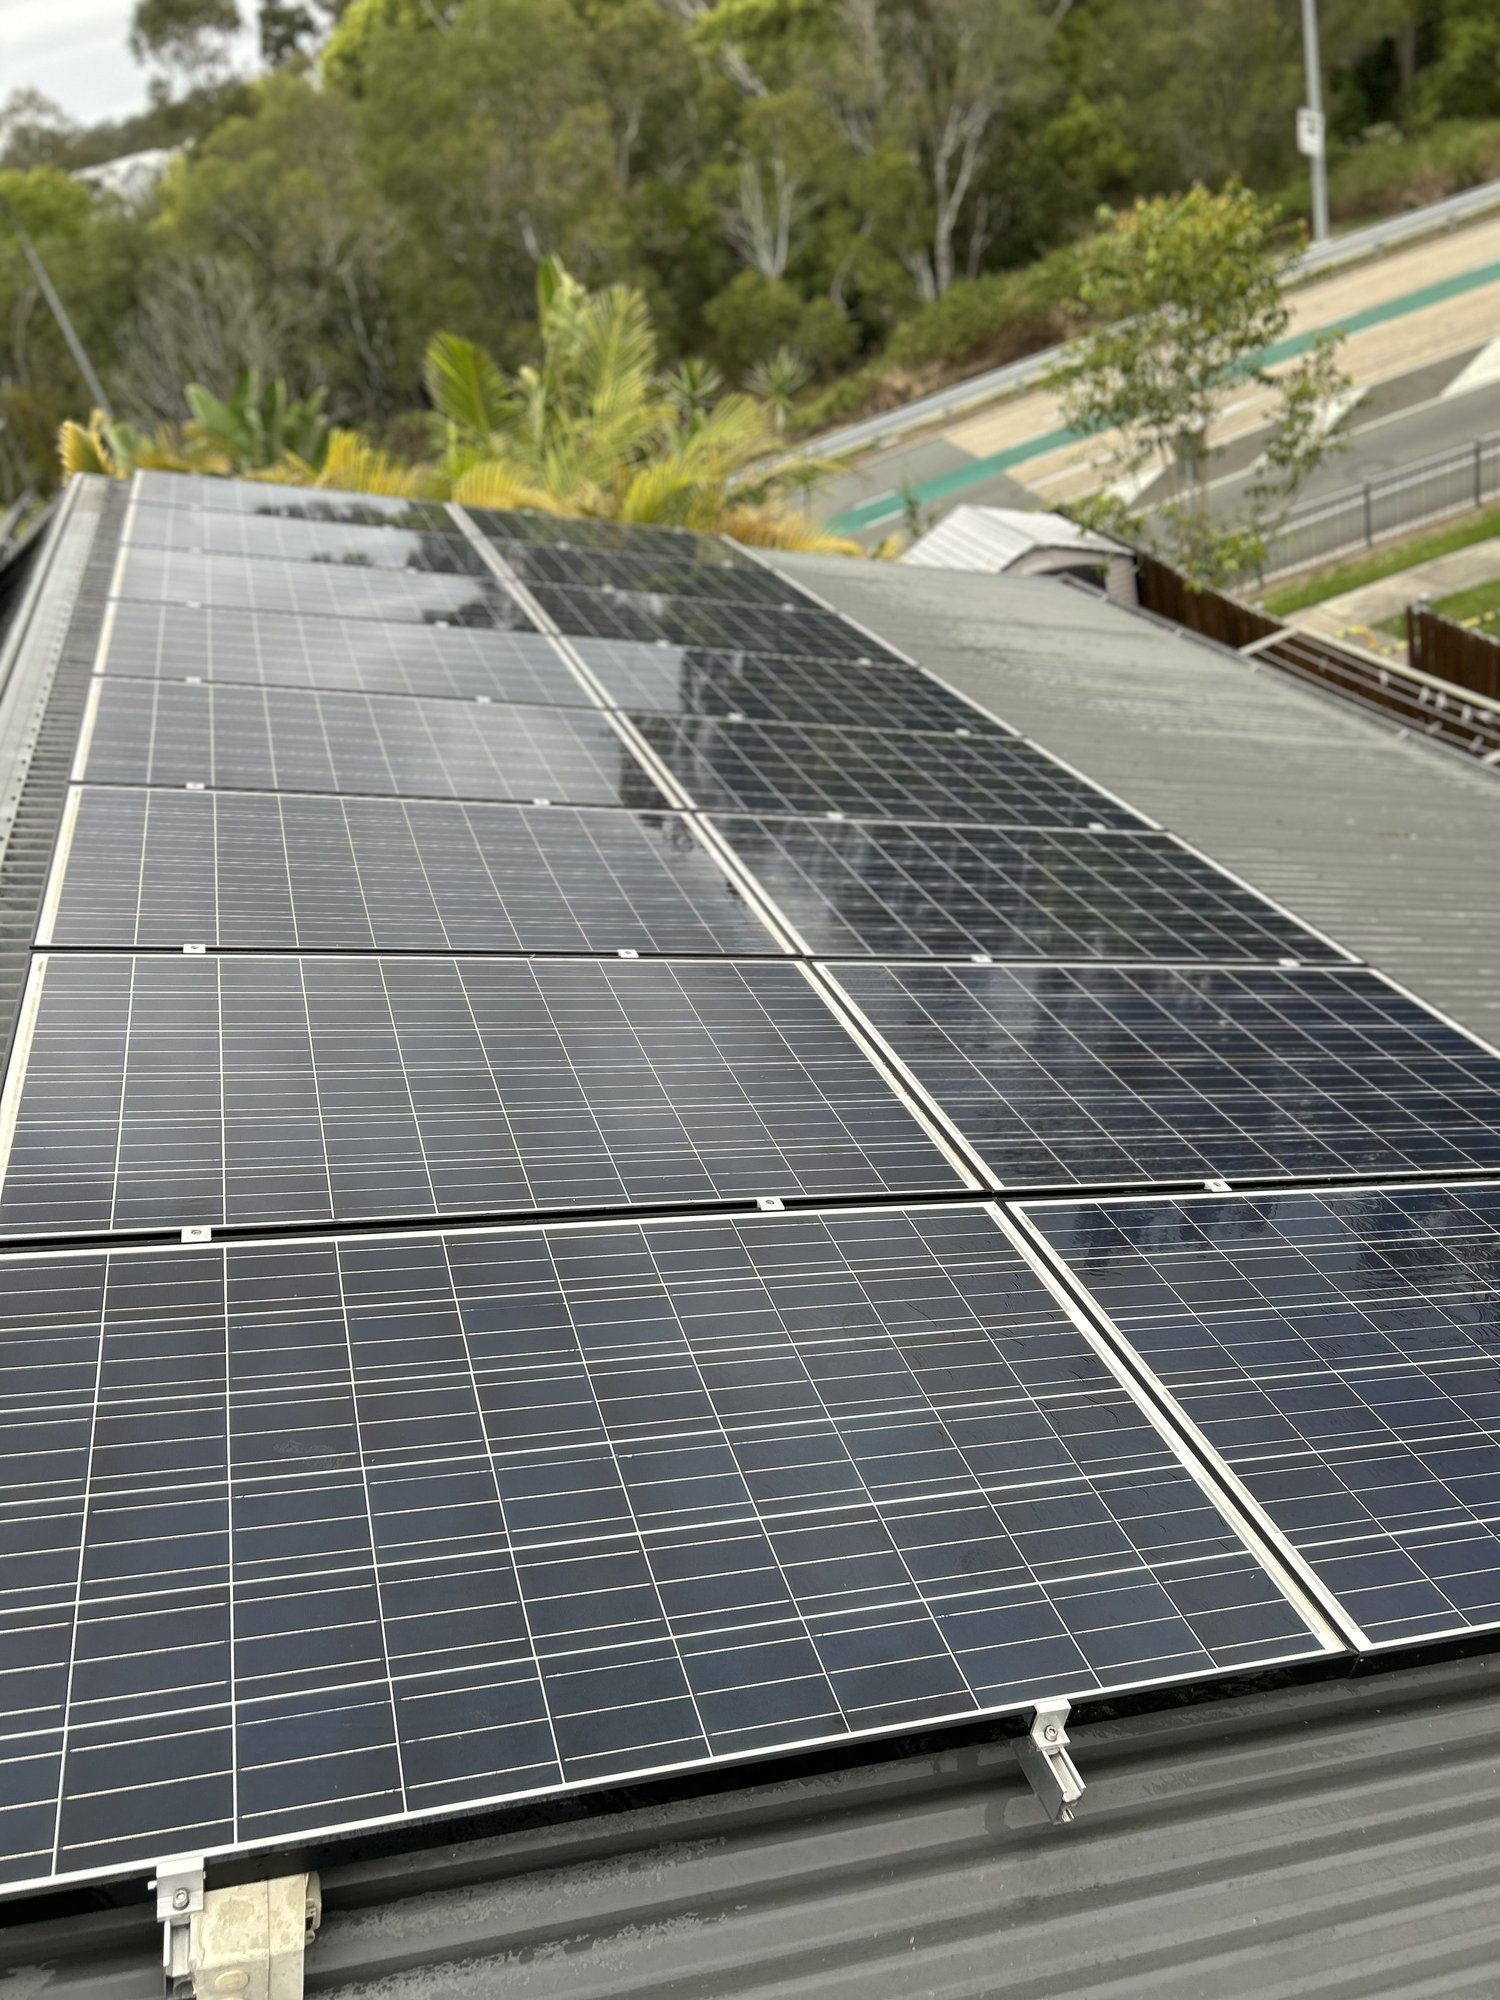 Connect With Top Professionals to Learn Solar Panel Care and Ensure Maximum Efficiency 